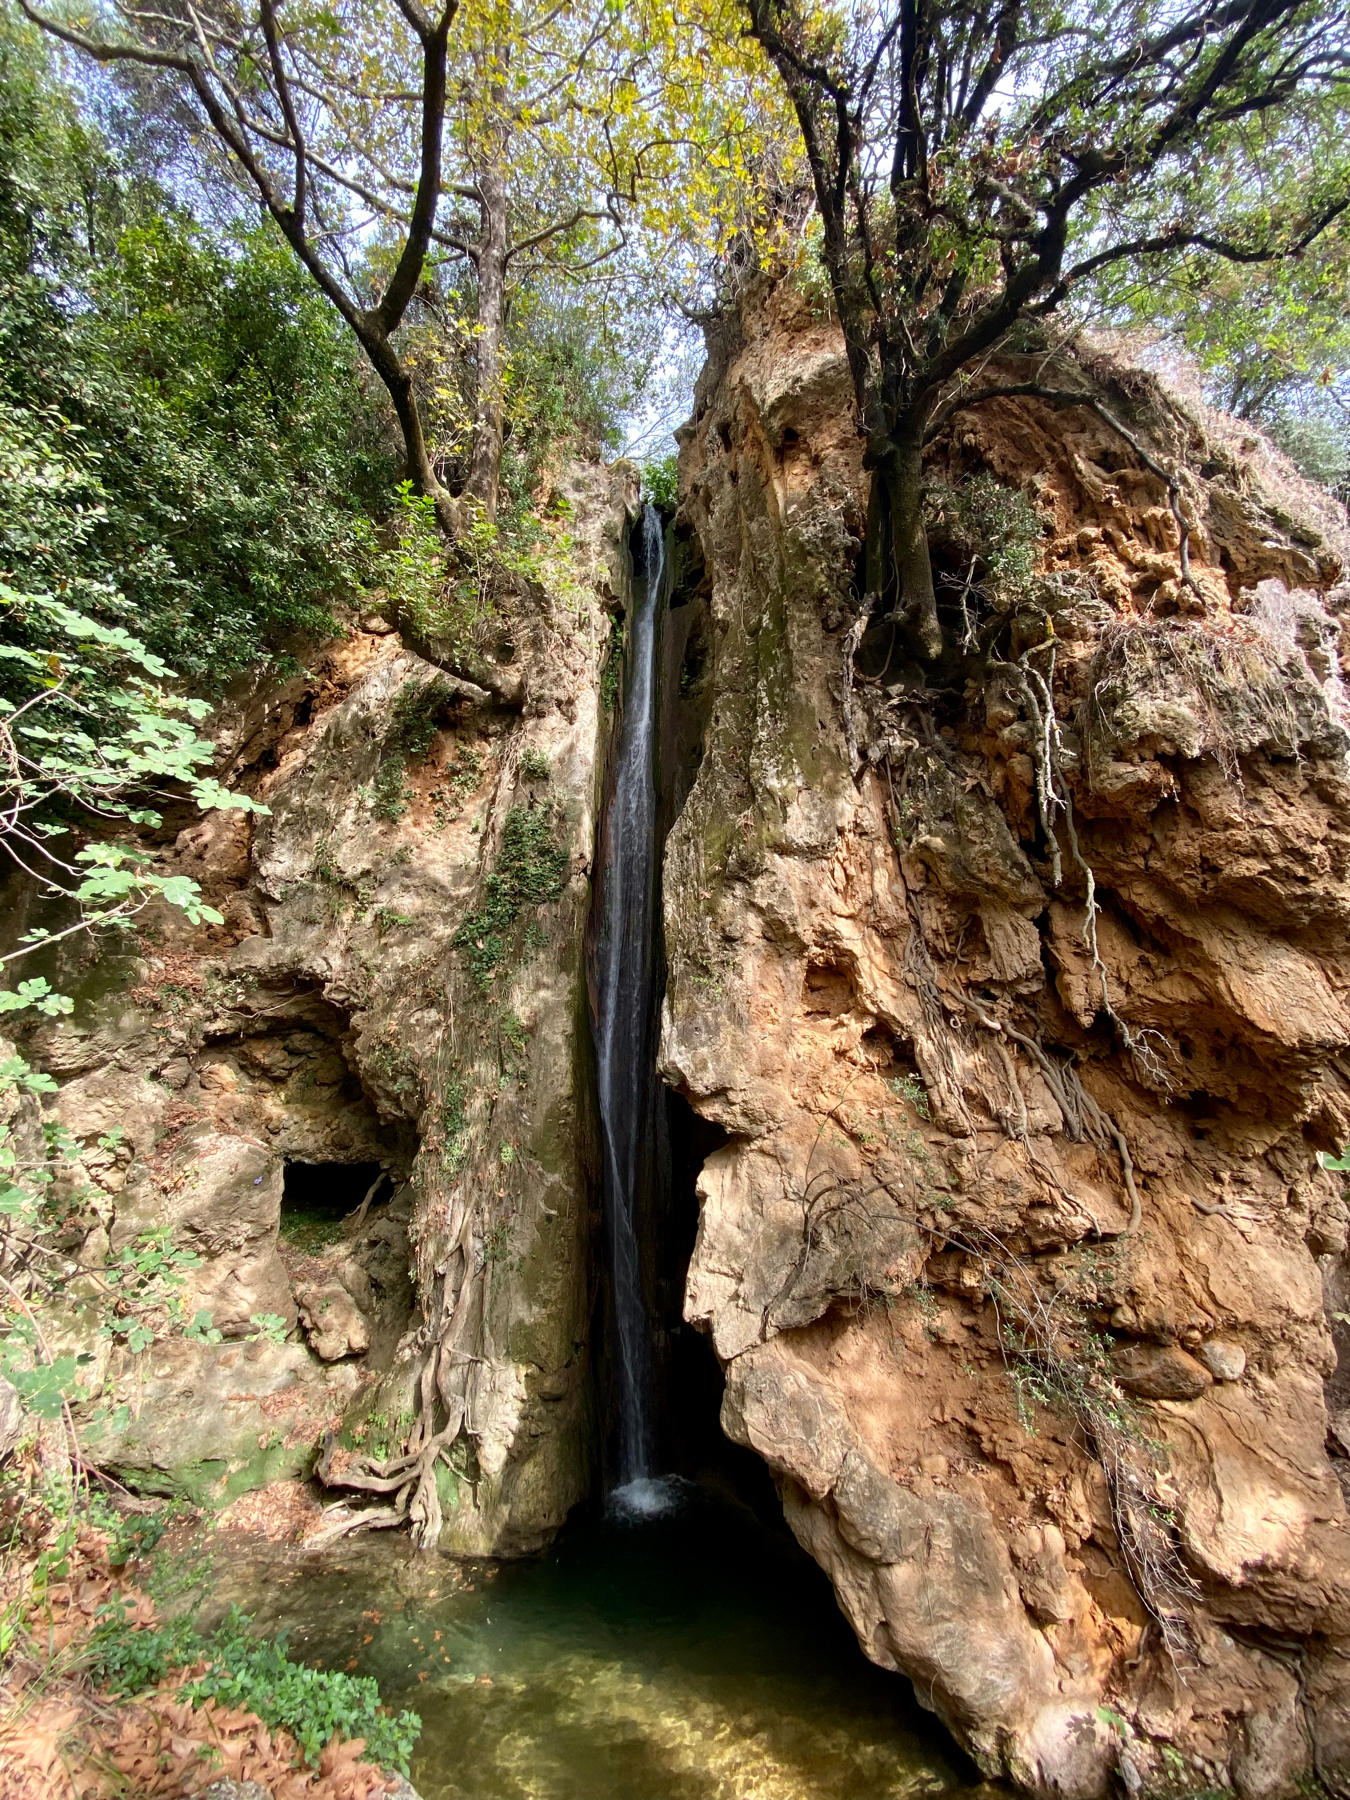 Narrow waterfall cascading down a small rocky cliff